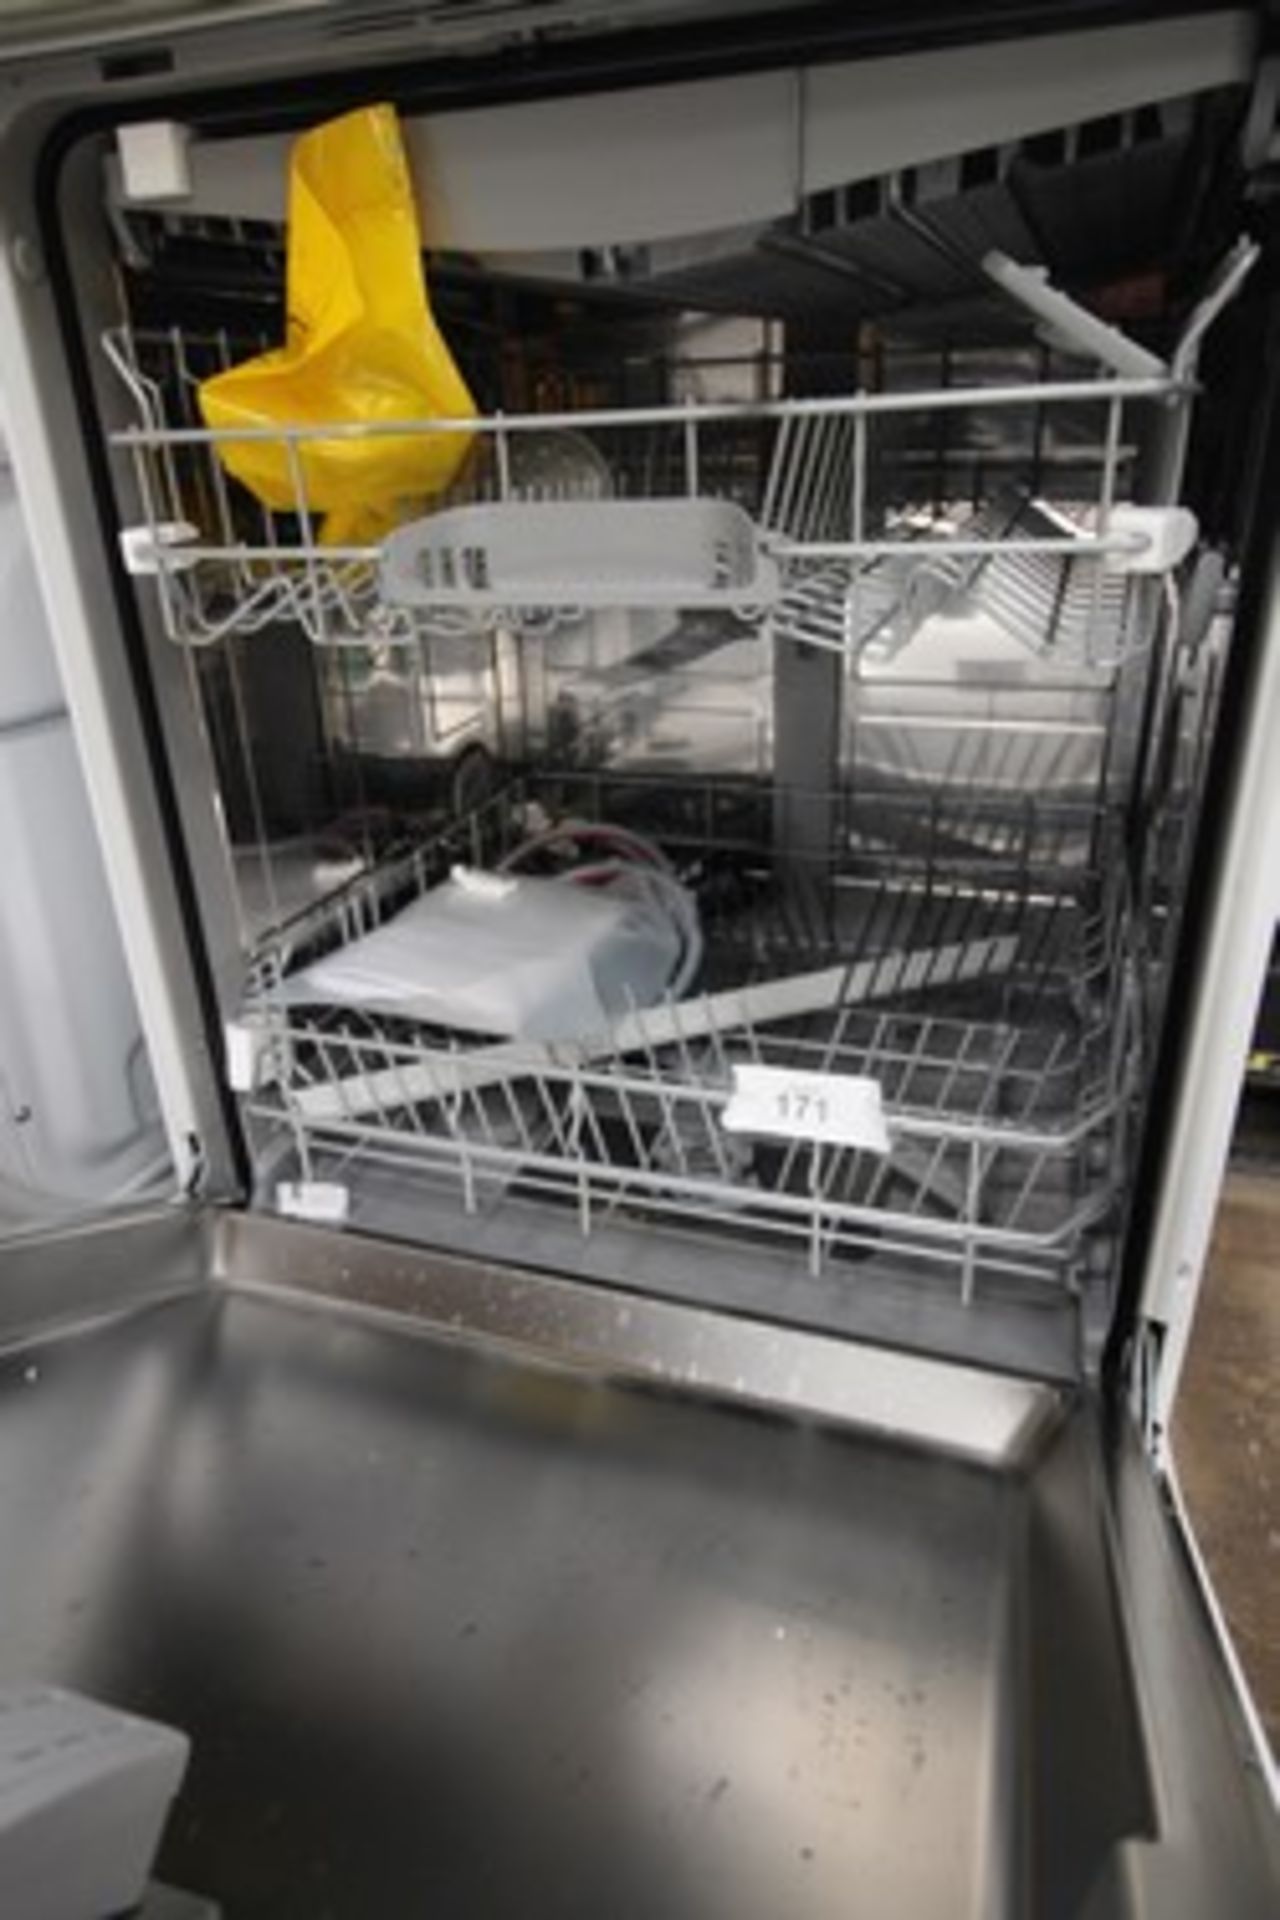 1 x Bosch Serie 2 dishwasher, Model SMS2HVW66G, missing front right foot and dented side panel - New - Image 3 of 4